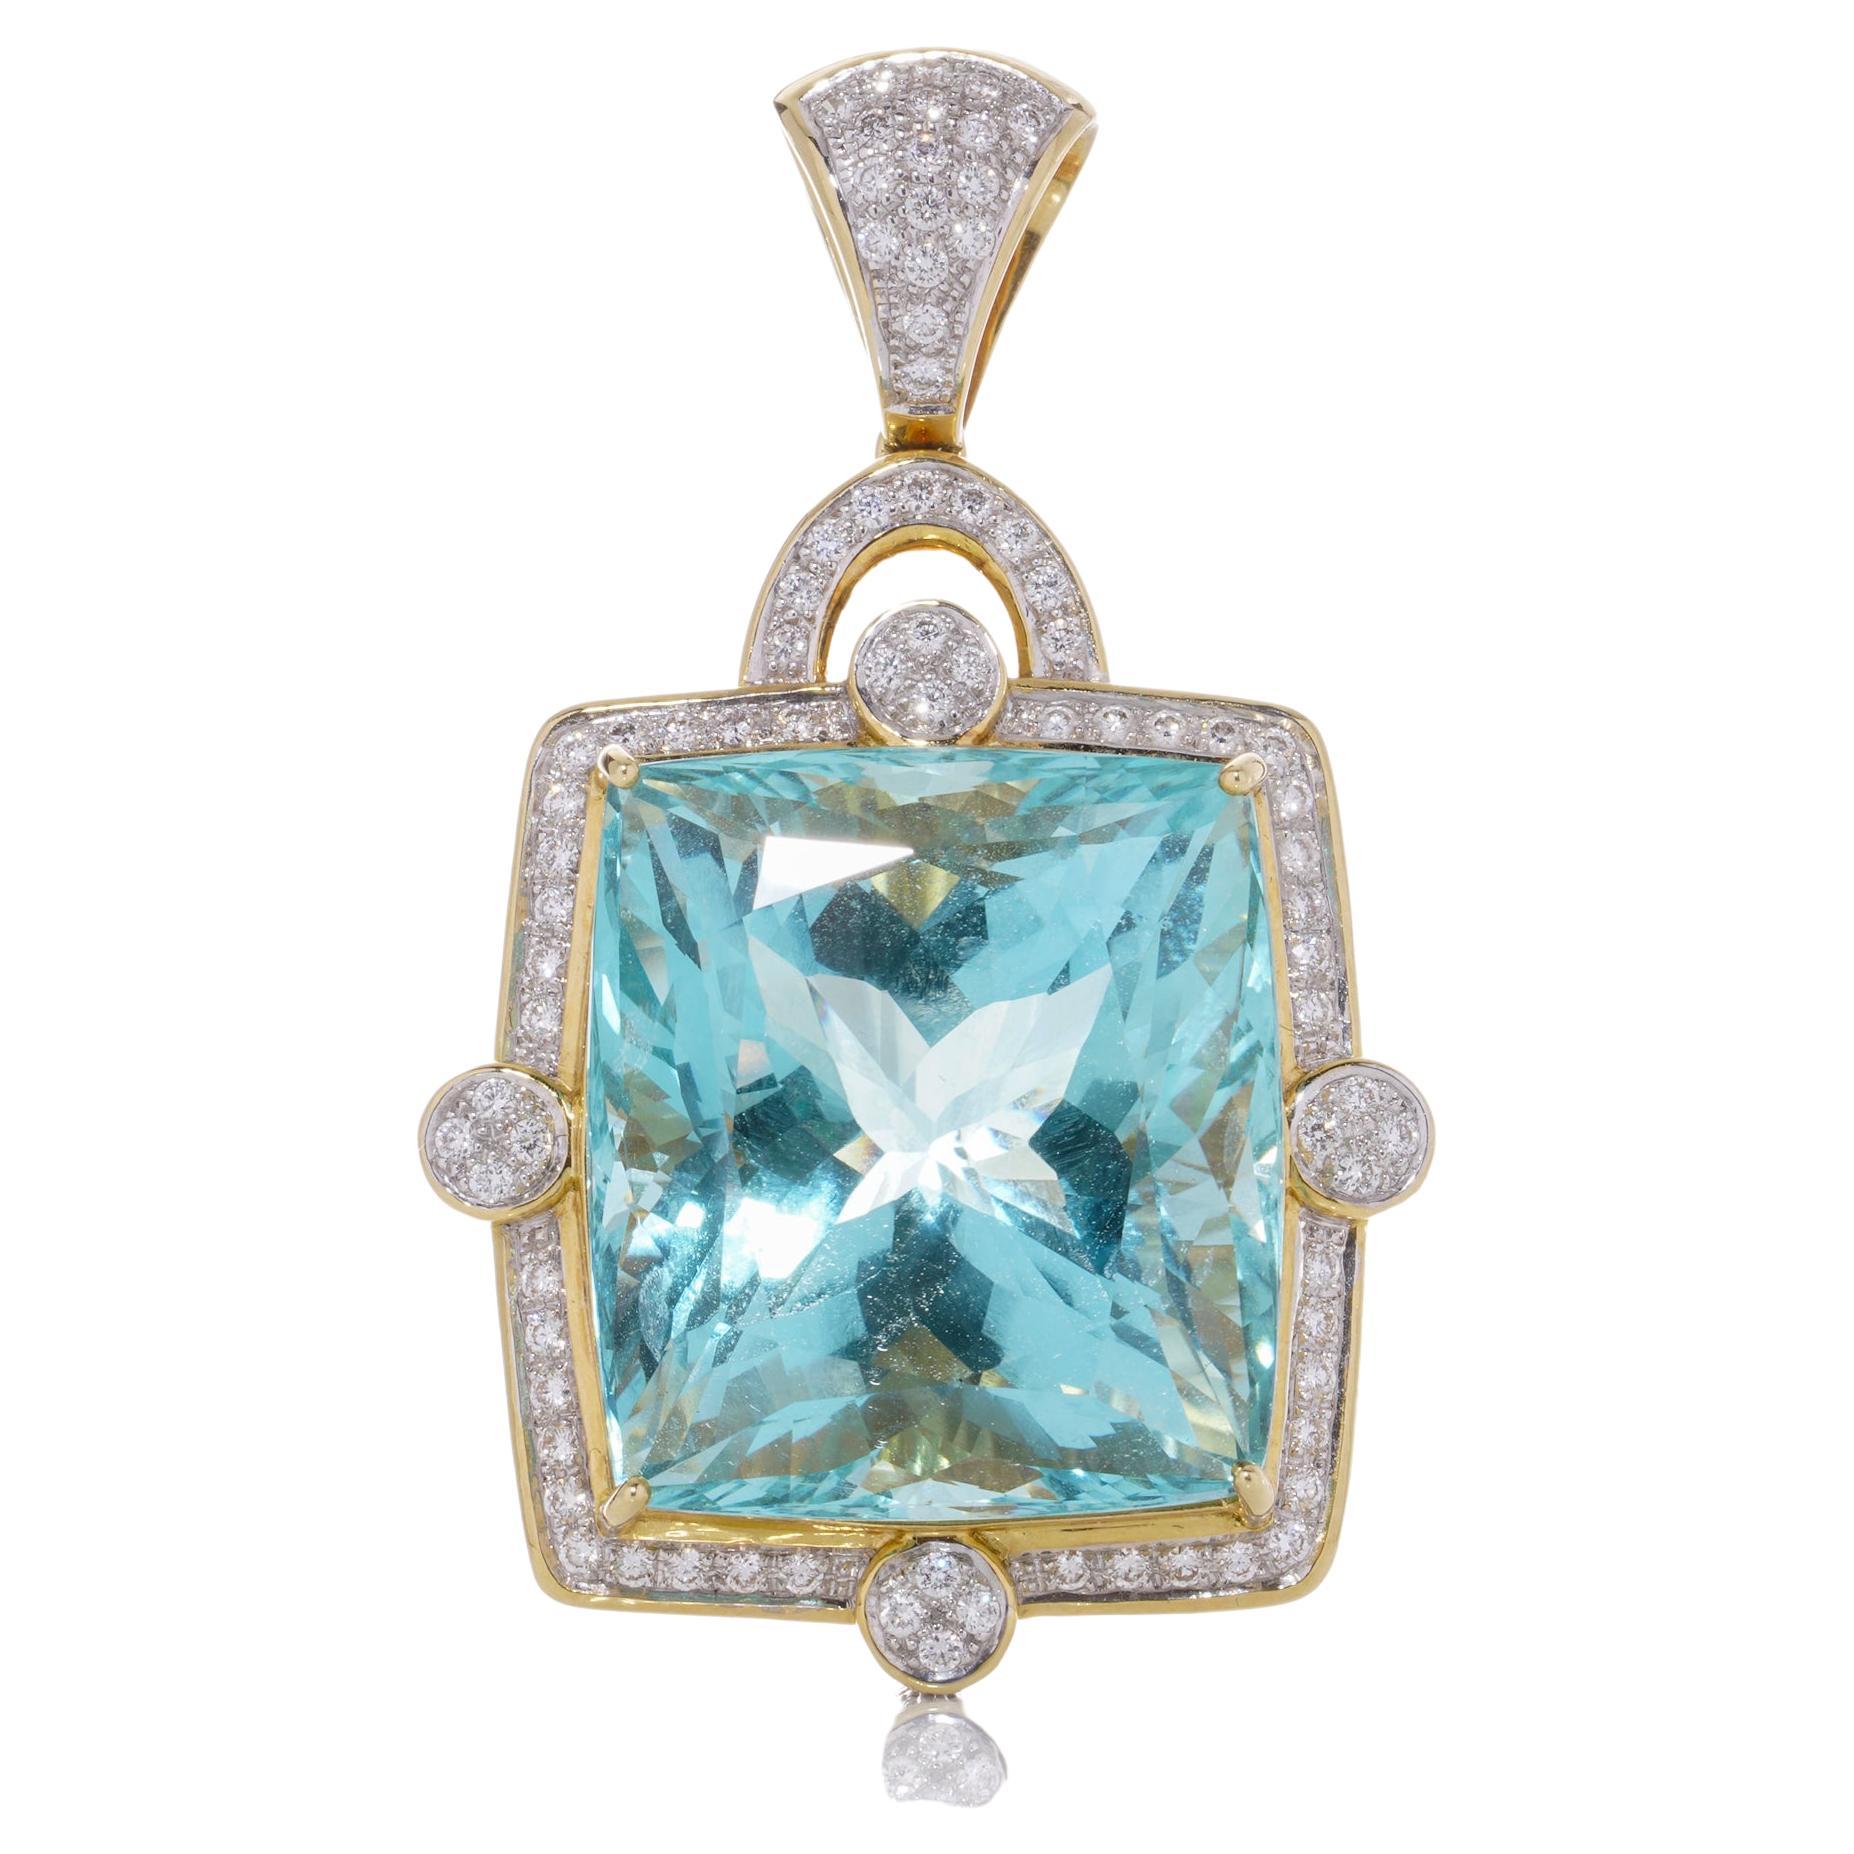 Exclusive 18k. yellow and white gold approx. 120 carats of Aquamarine pendant